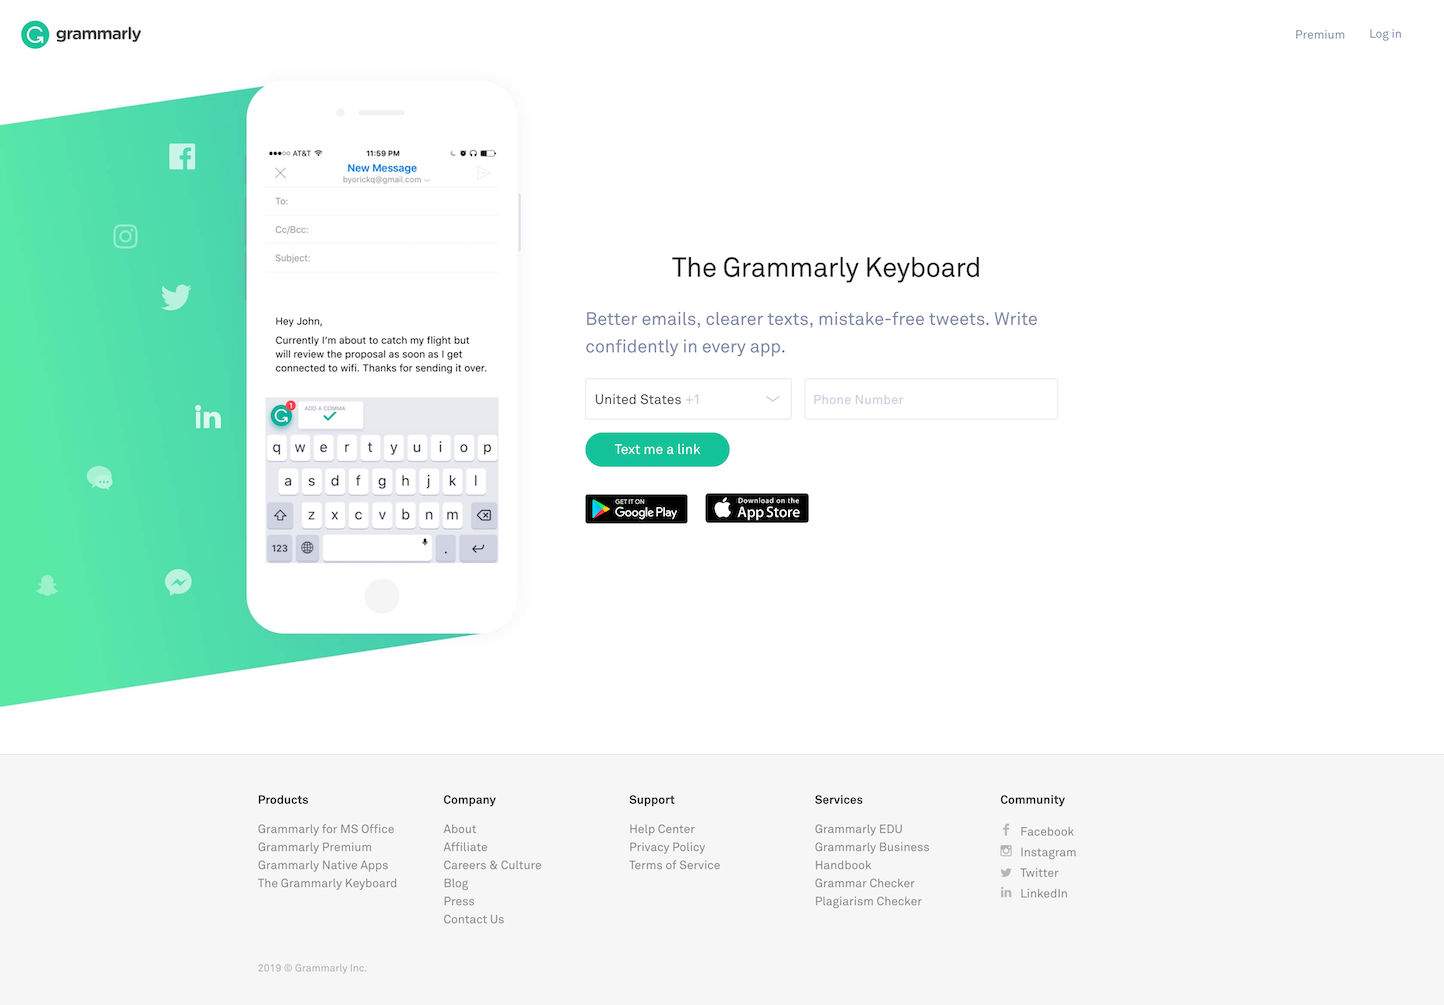 Screenshot of the Product - Keyboard page from the Grammarly website.